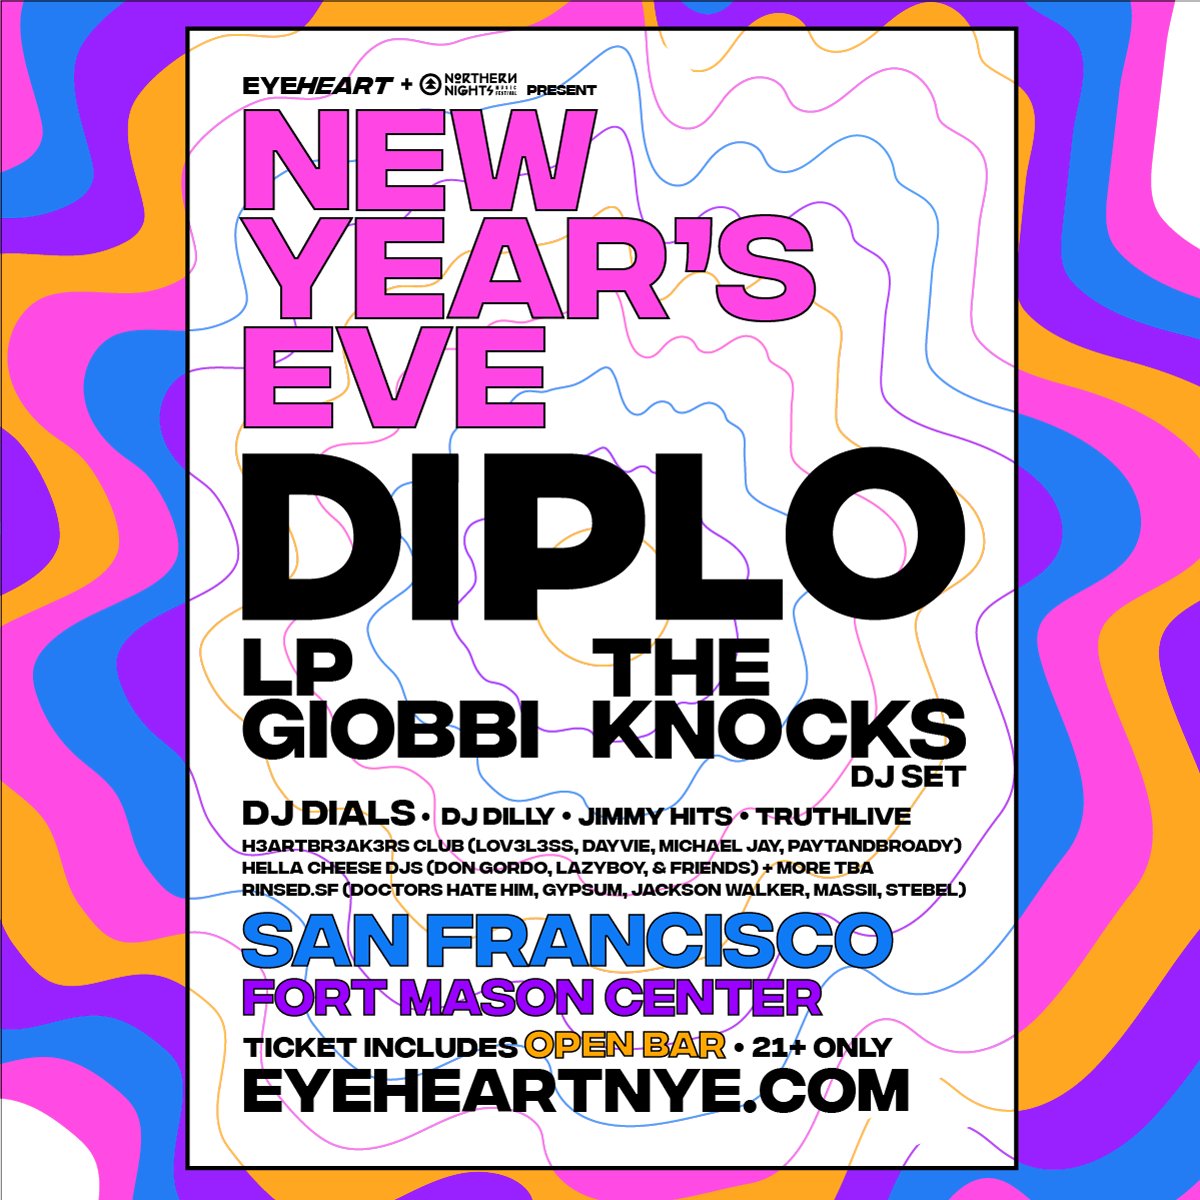 Your NYE plans are here 🥳🍾 Enter to win a pair of VIP tickets and ring in the new year with: 🪩 Sets by @diplo, @LPGiobbi, @theknocks + more 🥂 Open bar 🕺 @NNMFestival x @hushconcerts silent disco 🫶 Photo opps, art installations + more ENTER TO WIN: bit.ly/3t32chO